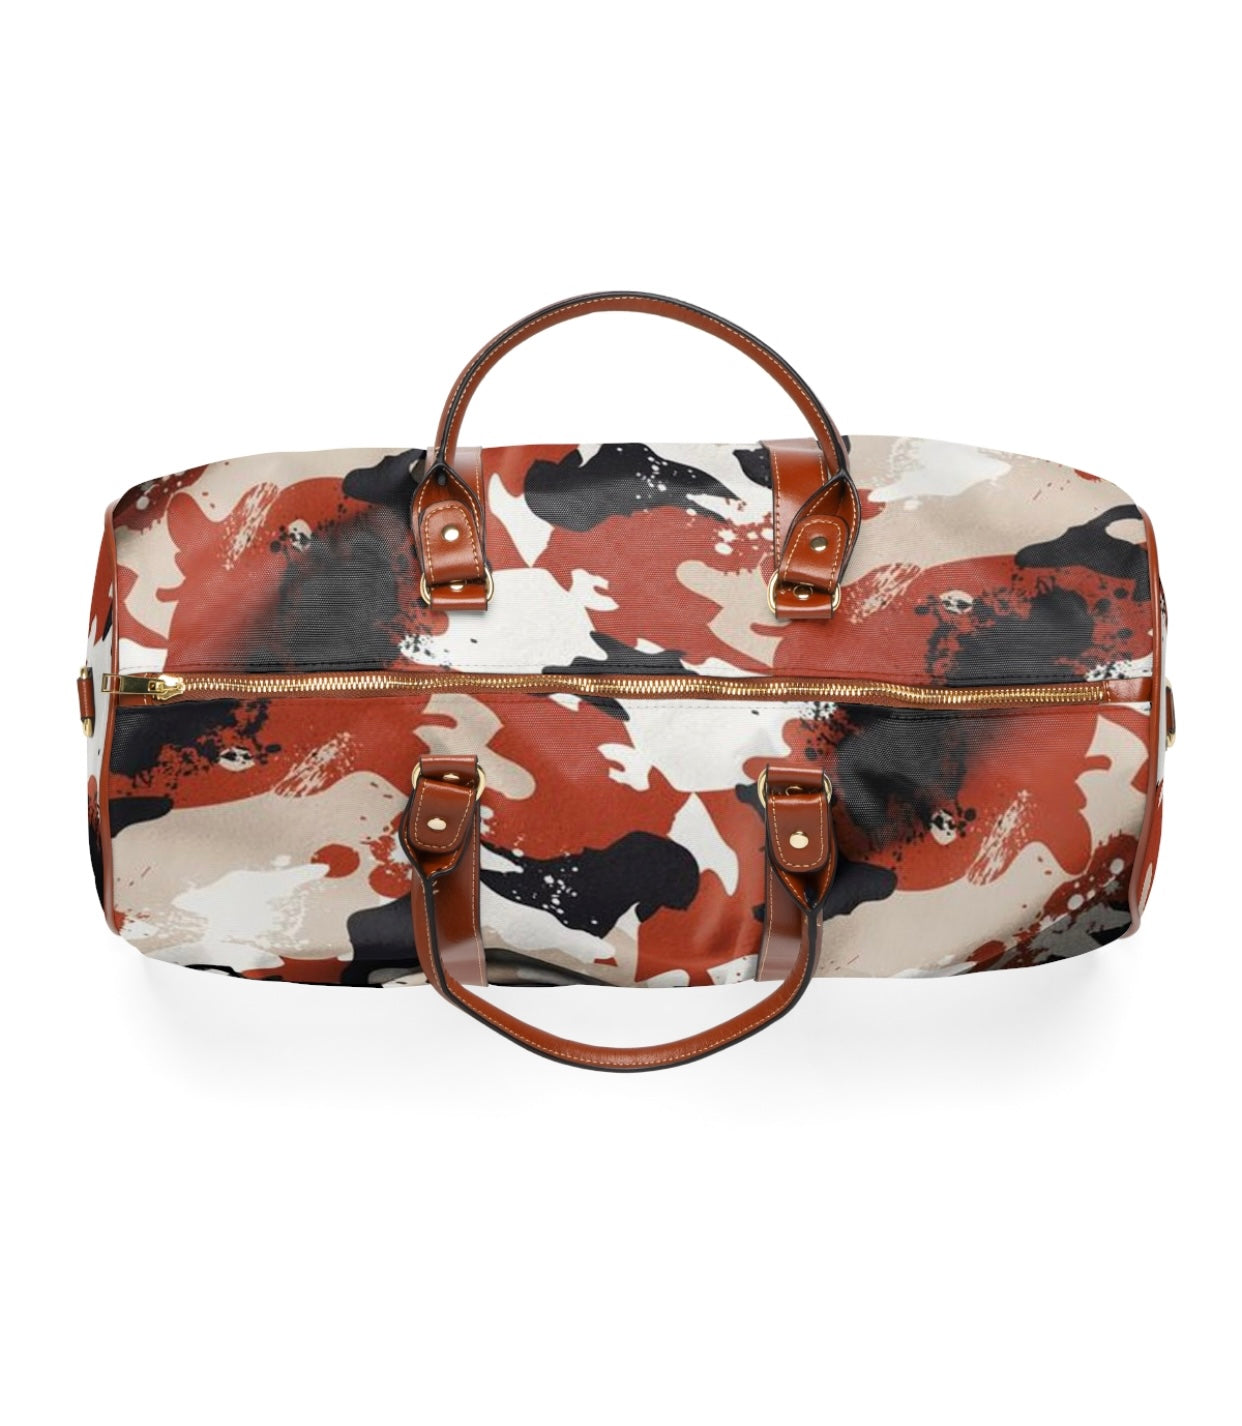 Starlife Camouflage Duffle Bag